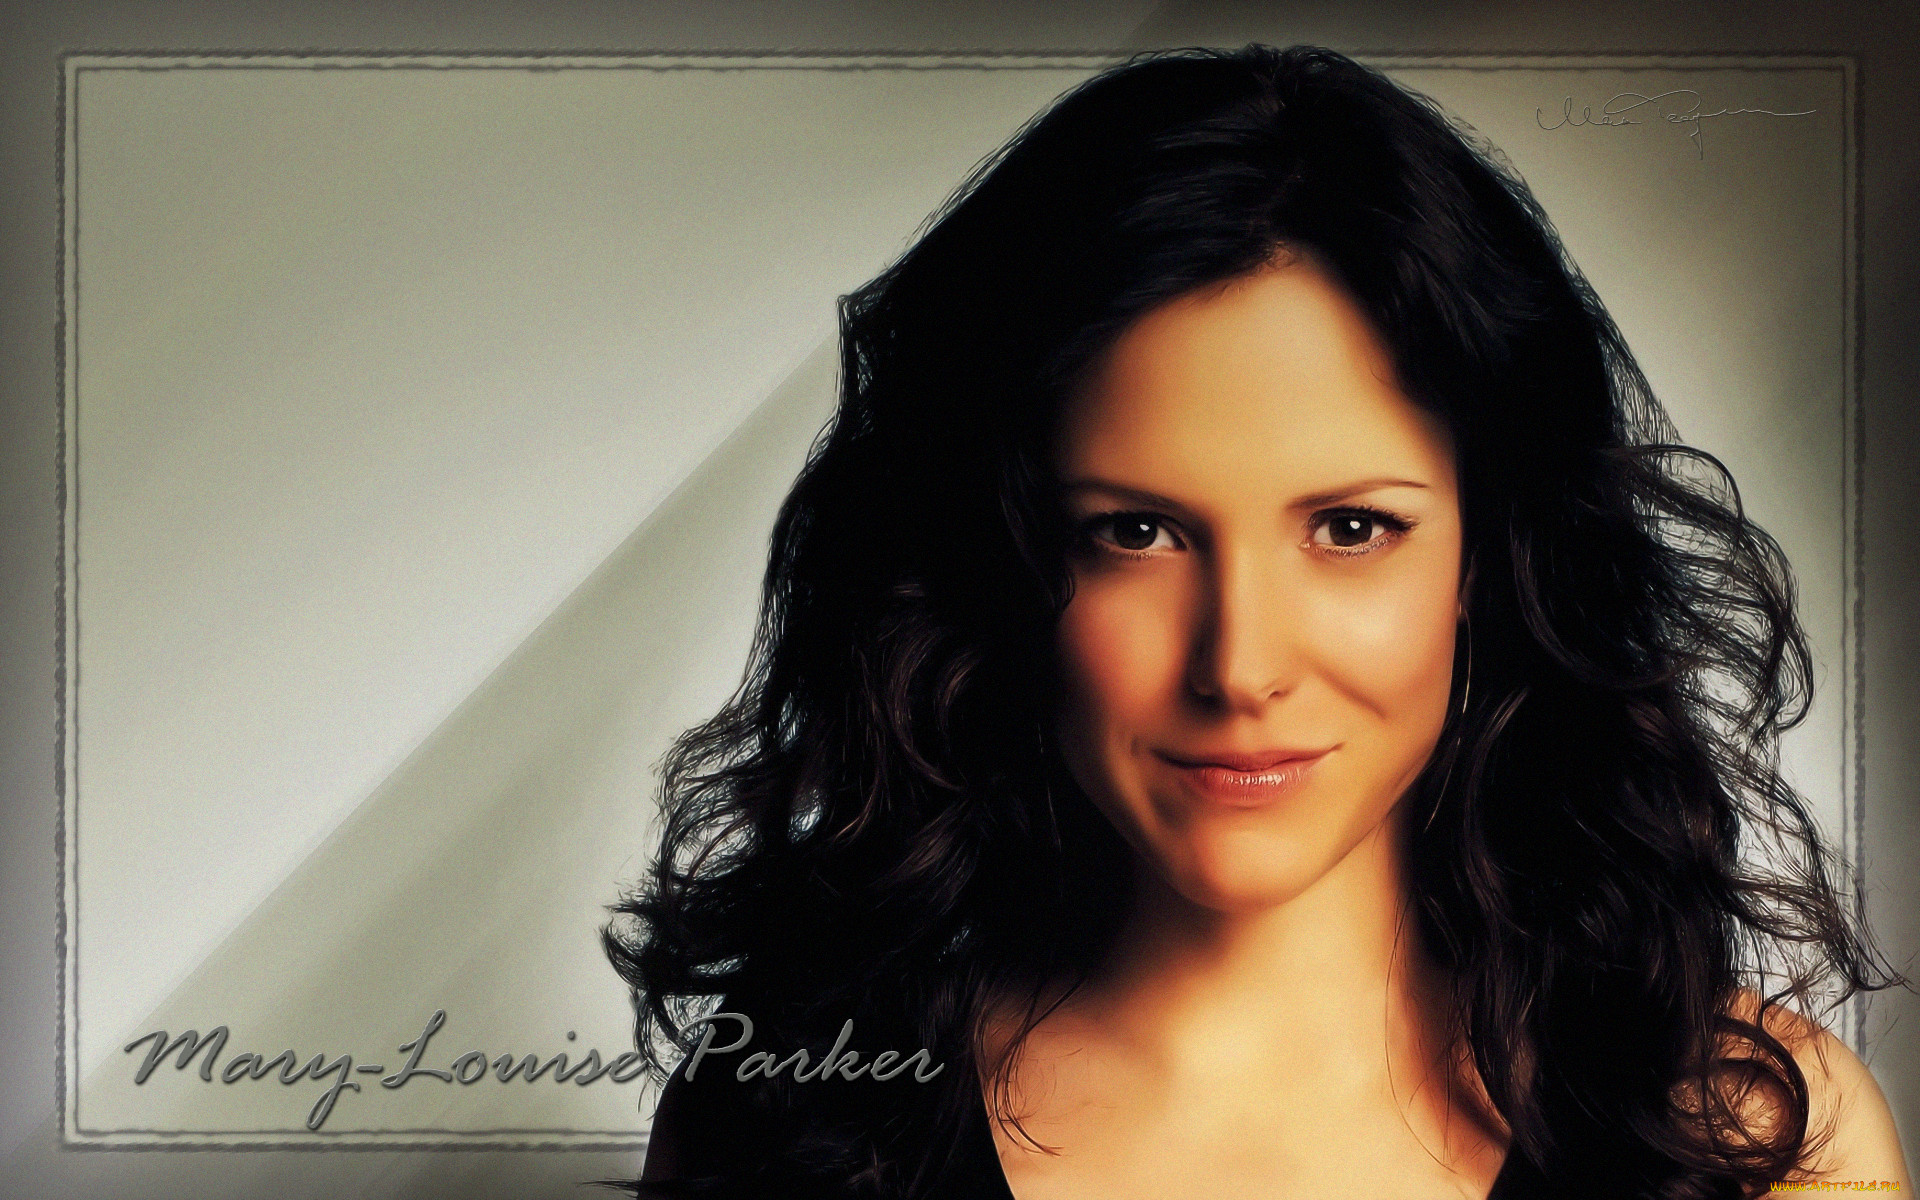 mary-louise parker, , , 